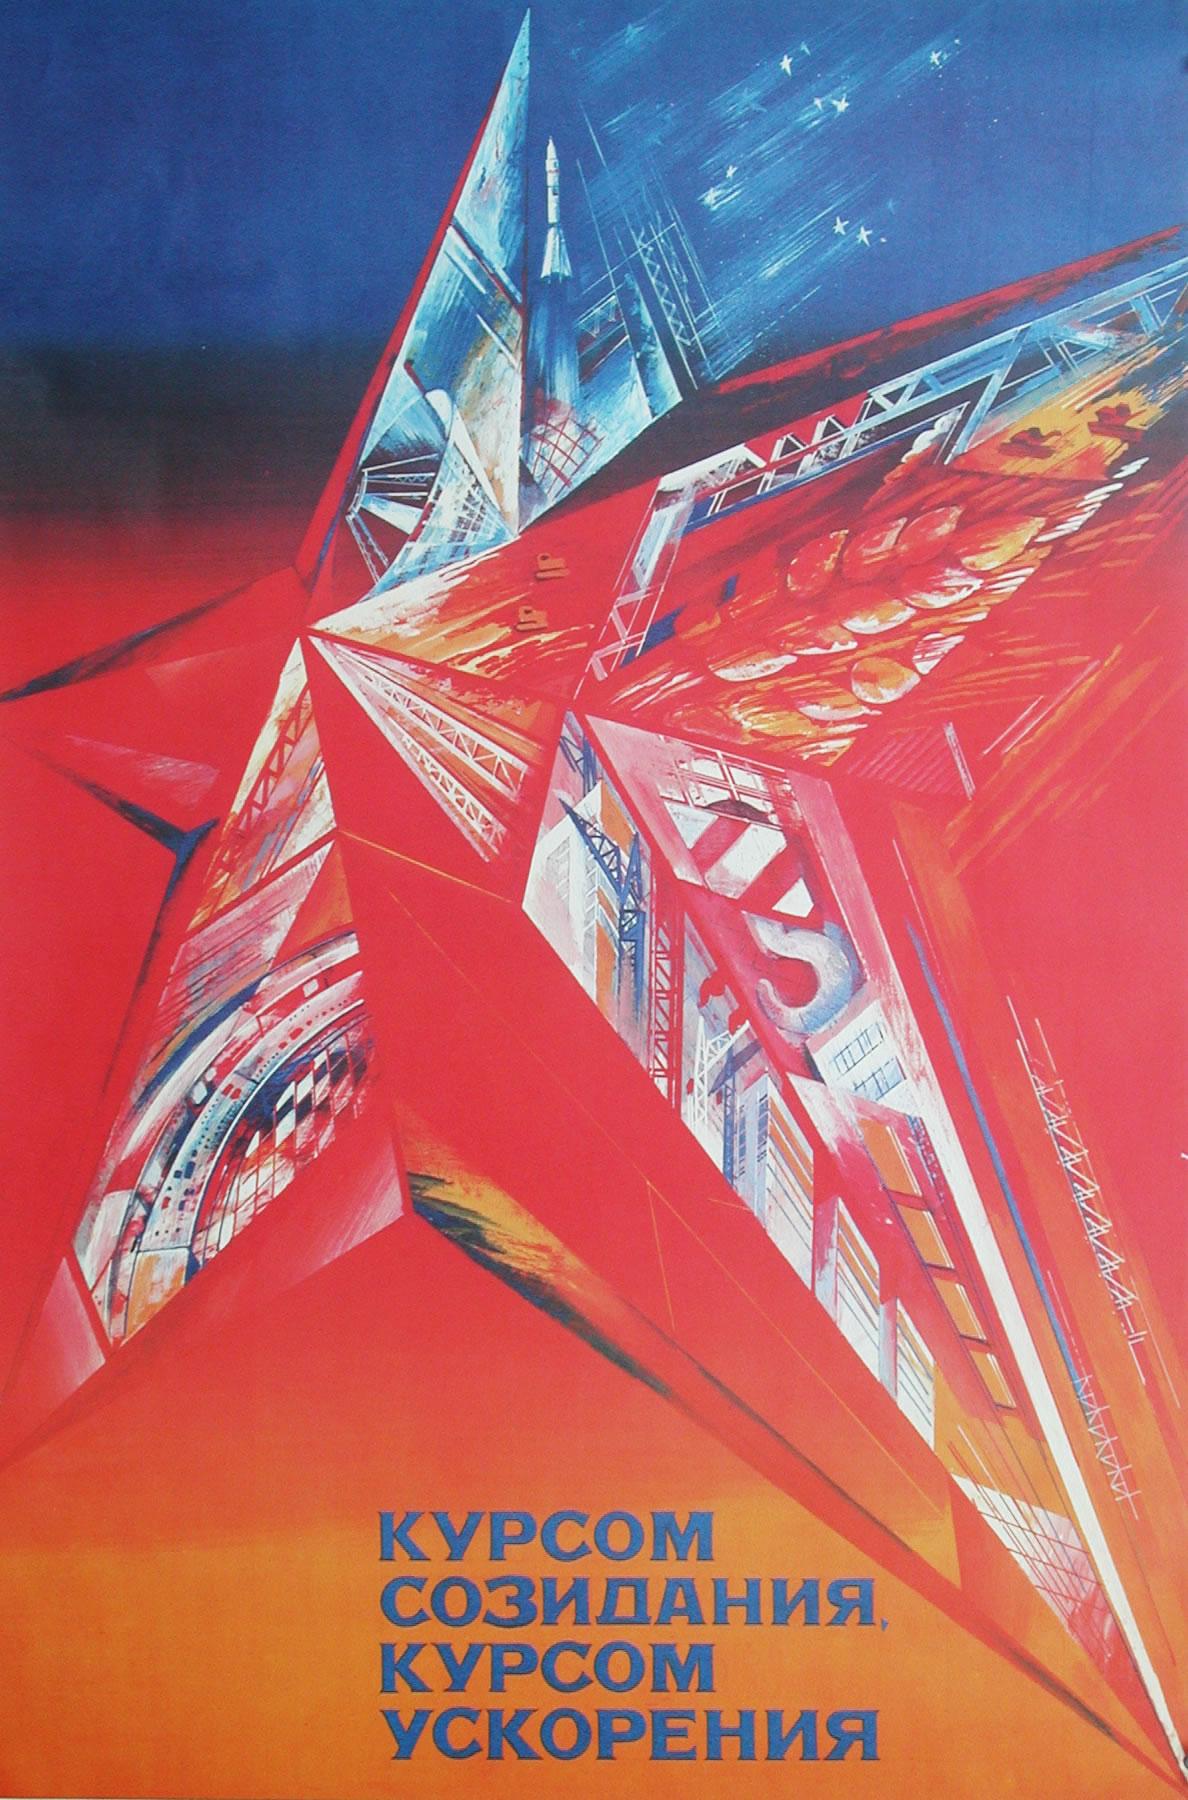 "Follow the path of development and progress" Perestroika Soviet Space Poster - Print by Unknown